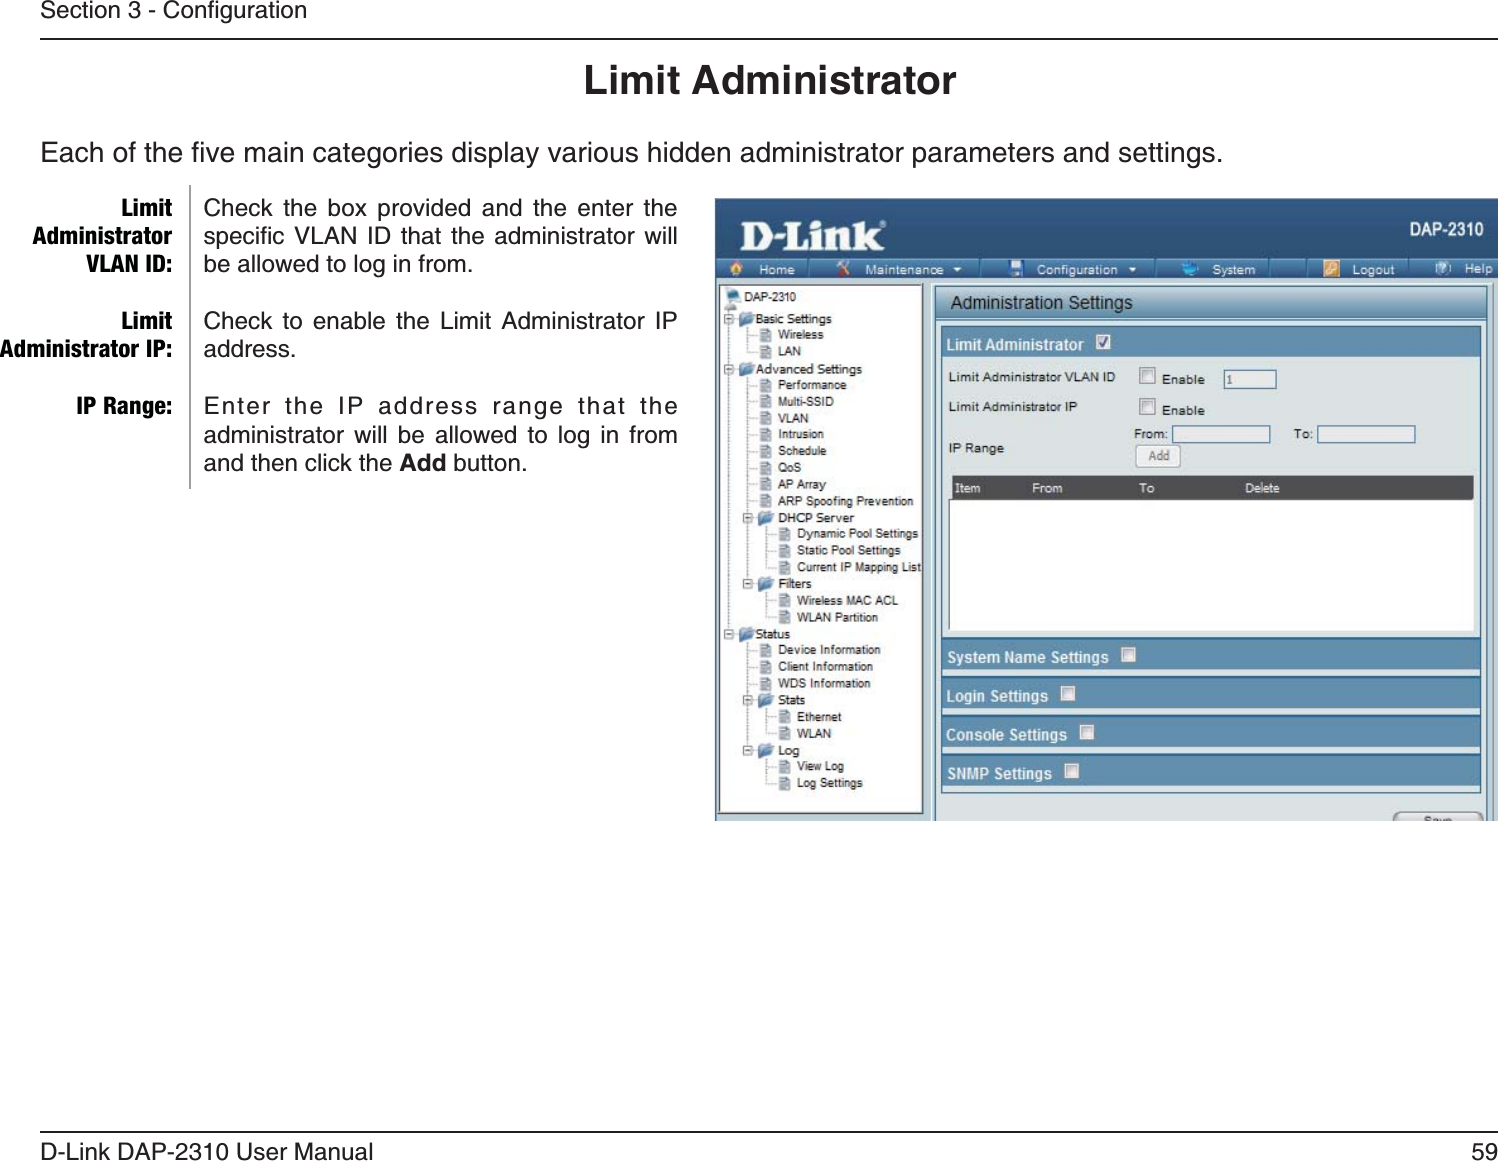 59D-Link DAP-2310 User ManualLimit AdministratorCheck the box provided and the enter the    be allowed to log in from.Check to enable the Limit Administrator IP address.Enter the IP address range that the administrator will be allowed to log in from and then click the Add button.Limit Administrator VLAN ID:Limit Administrator IP:IP Range: